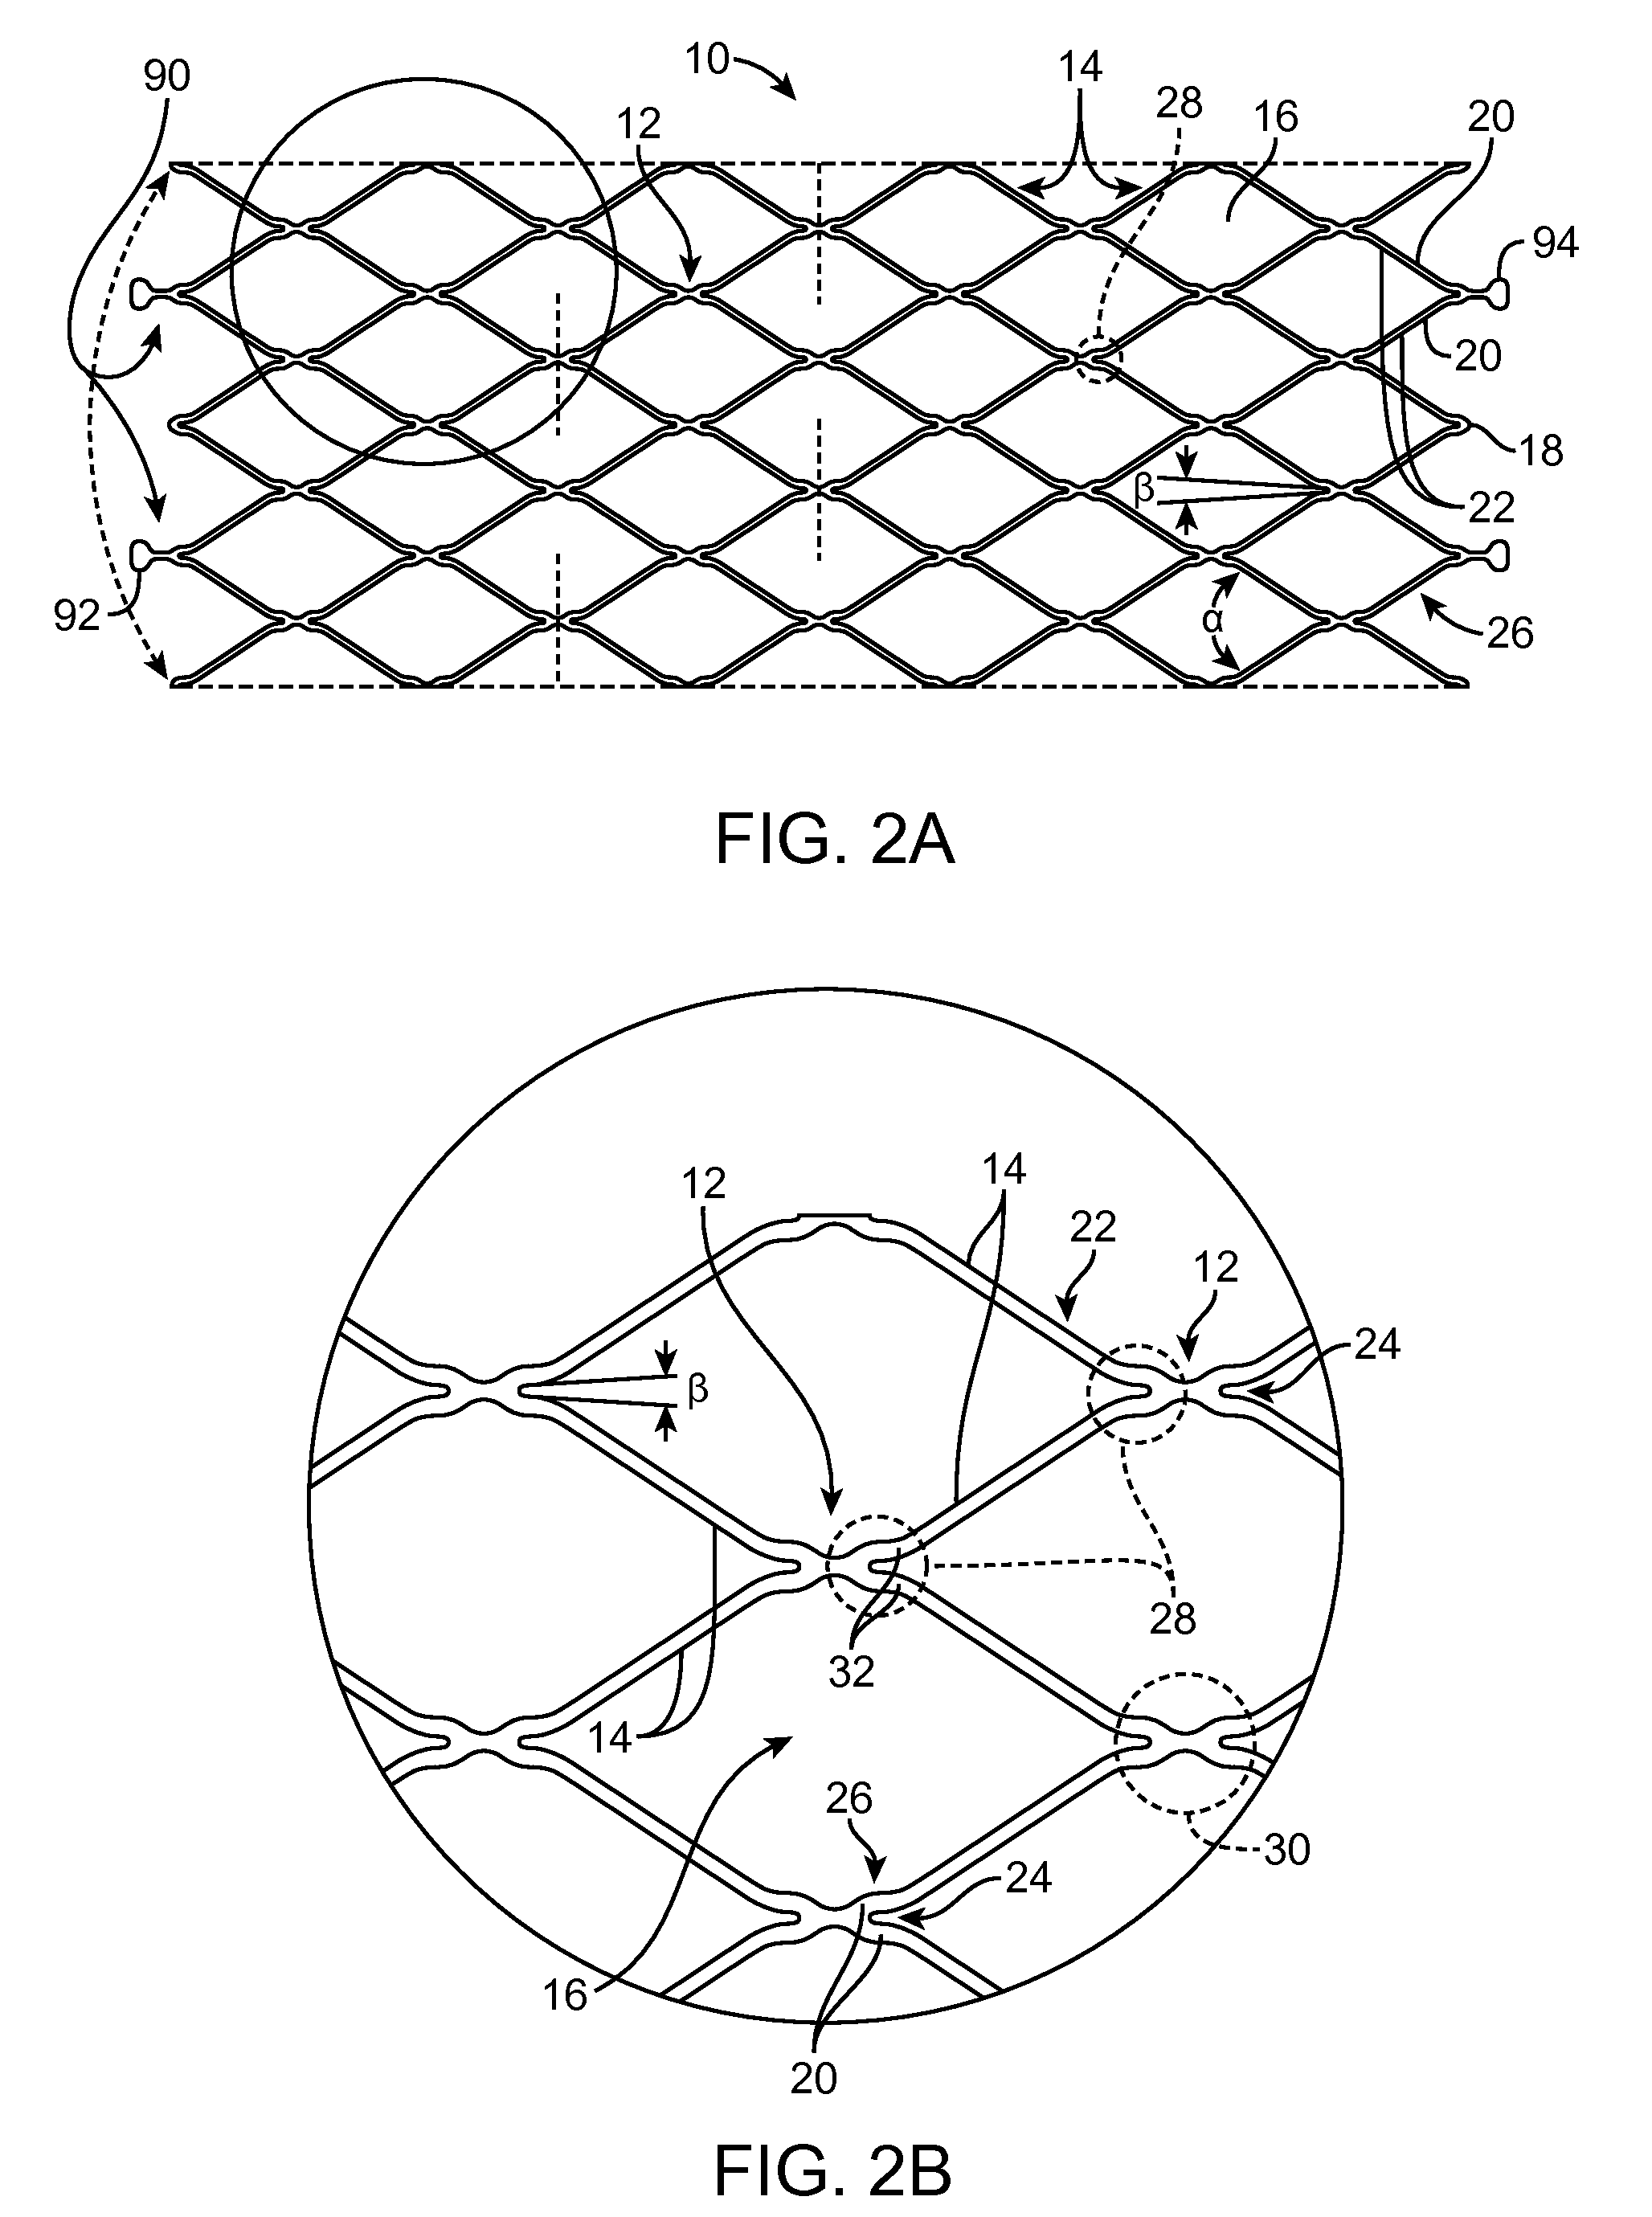 Indirect-release electrolytic implant delivery systems